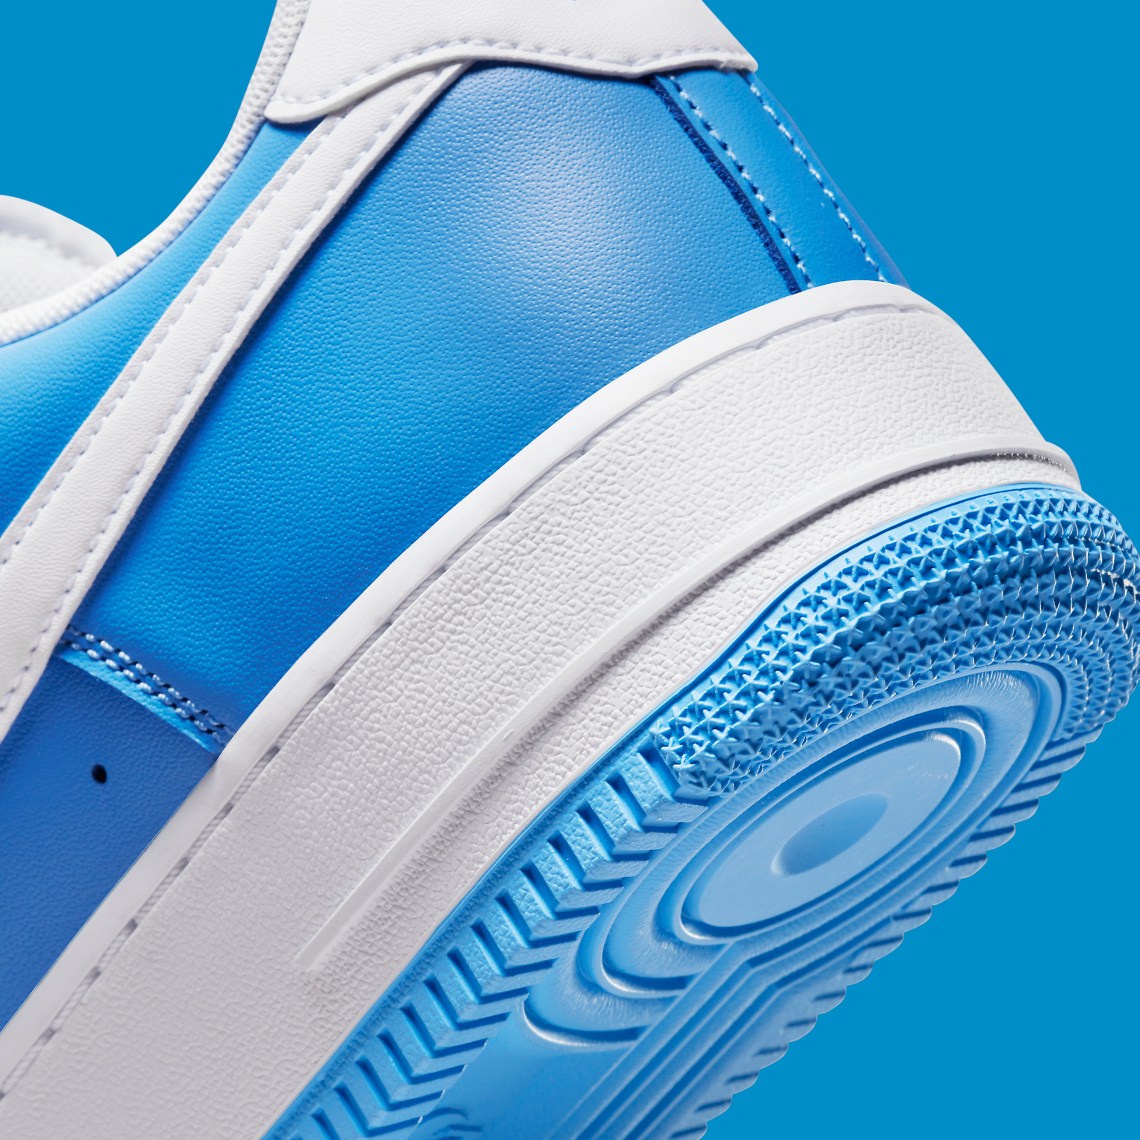 Nike Air Force 1 Low “Powder Blue” Release